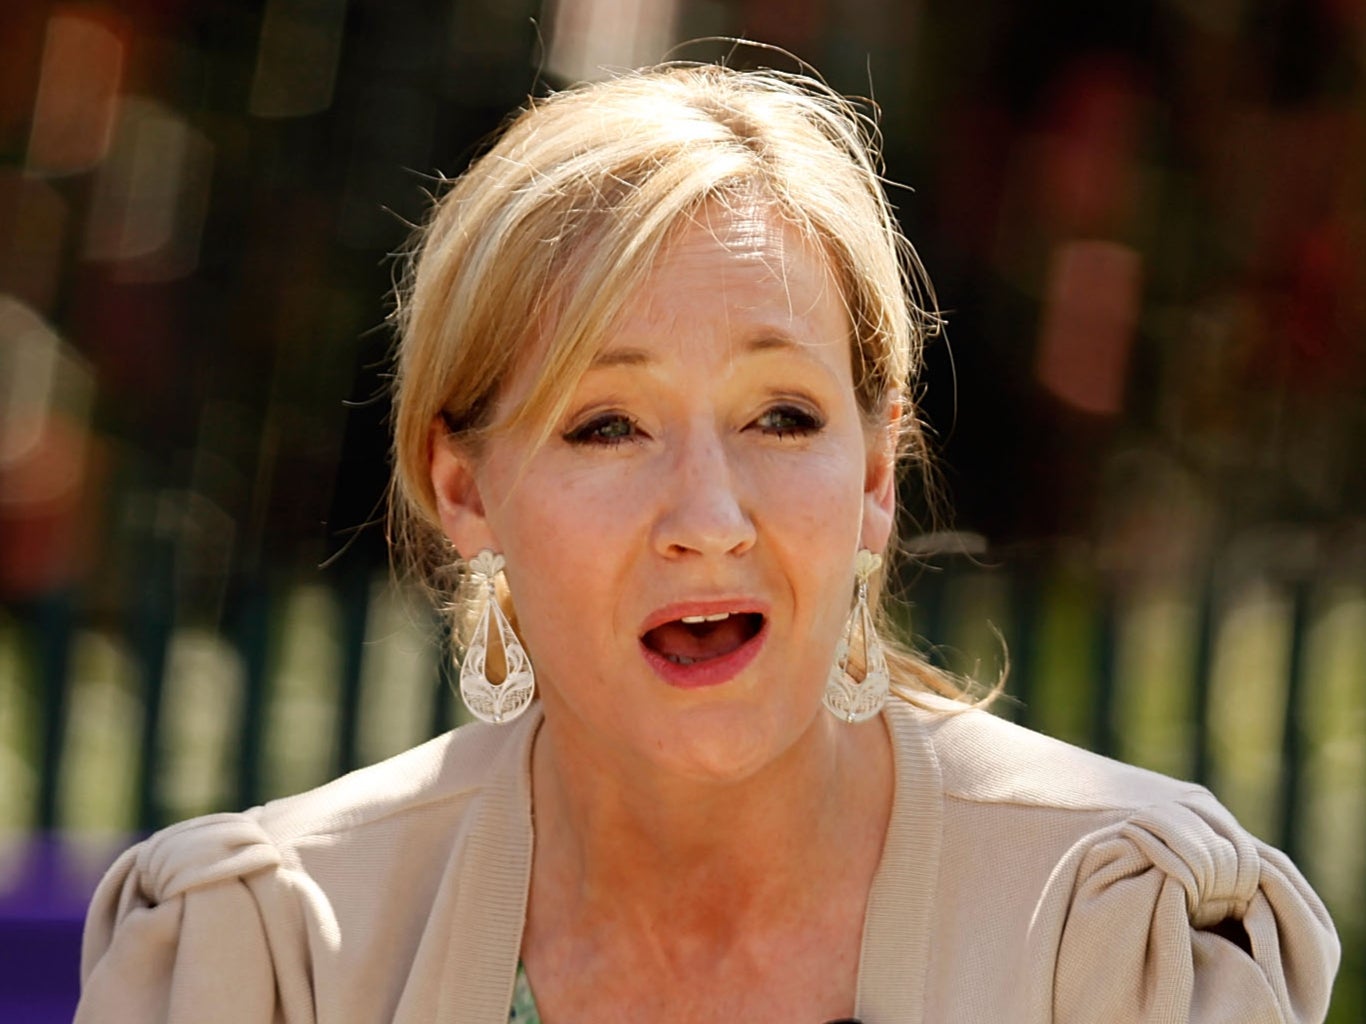 JK Rowling said she had received a significant amount of ‘murder and torture’ threats